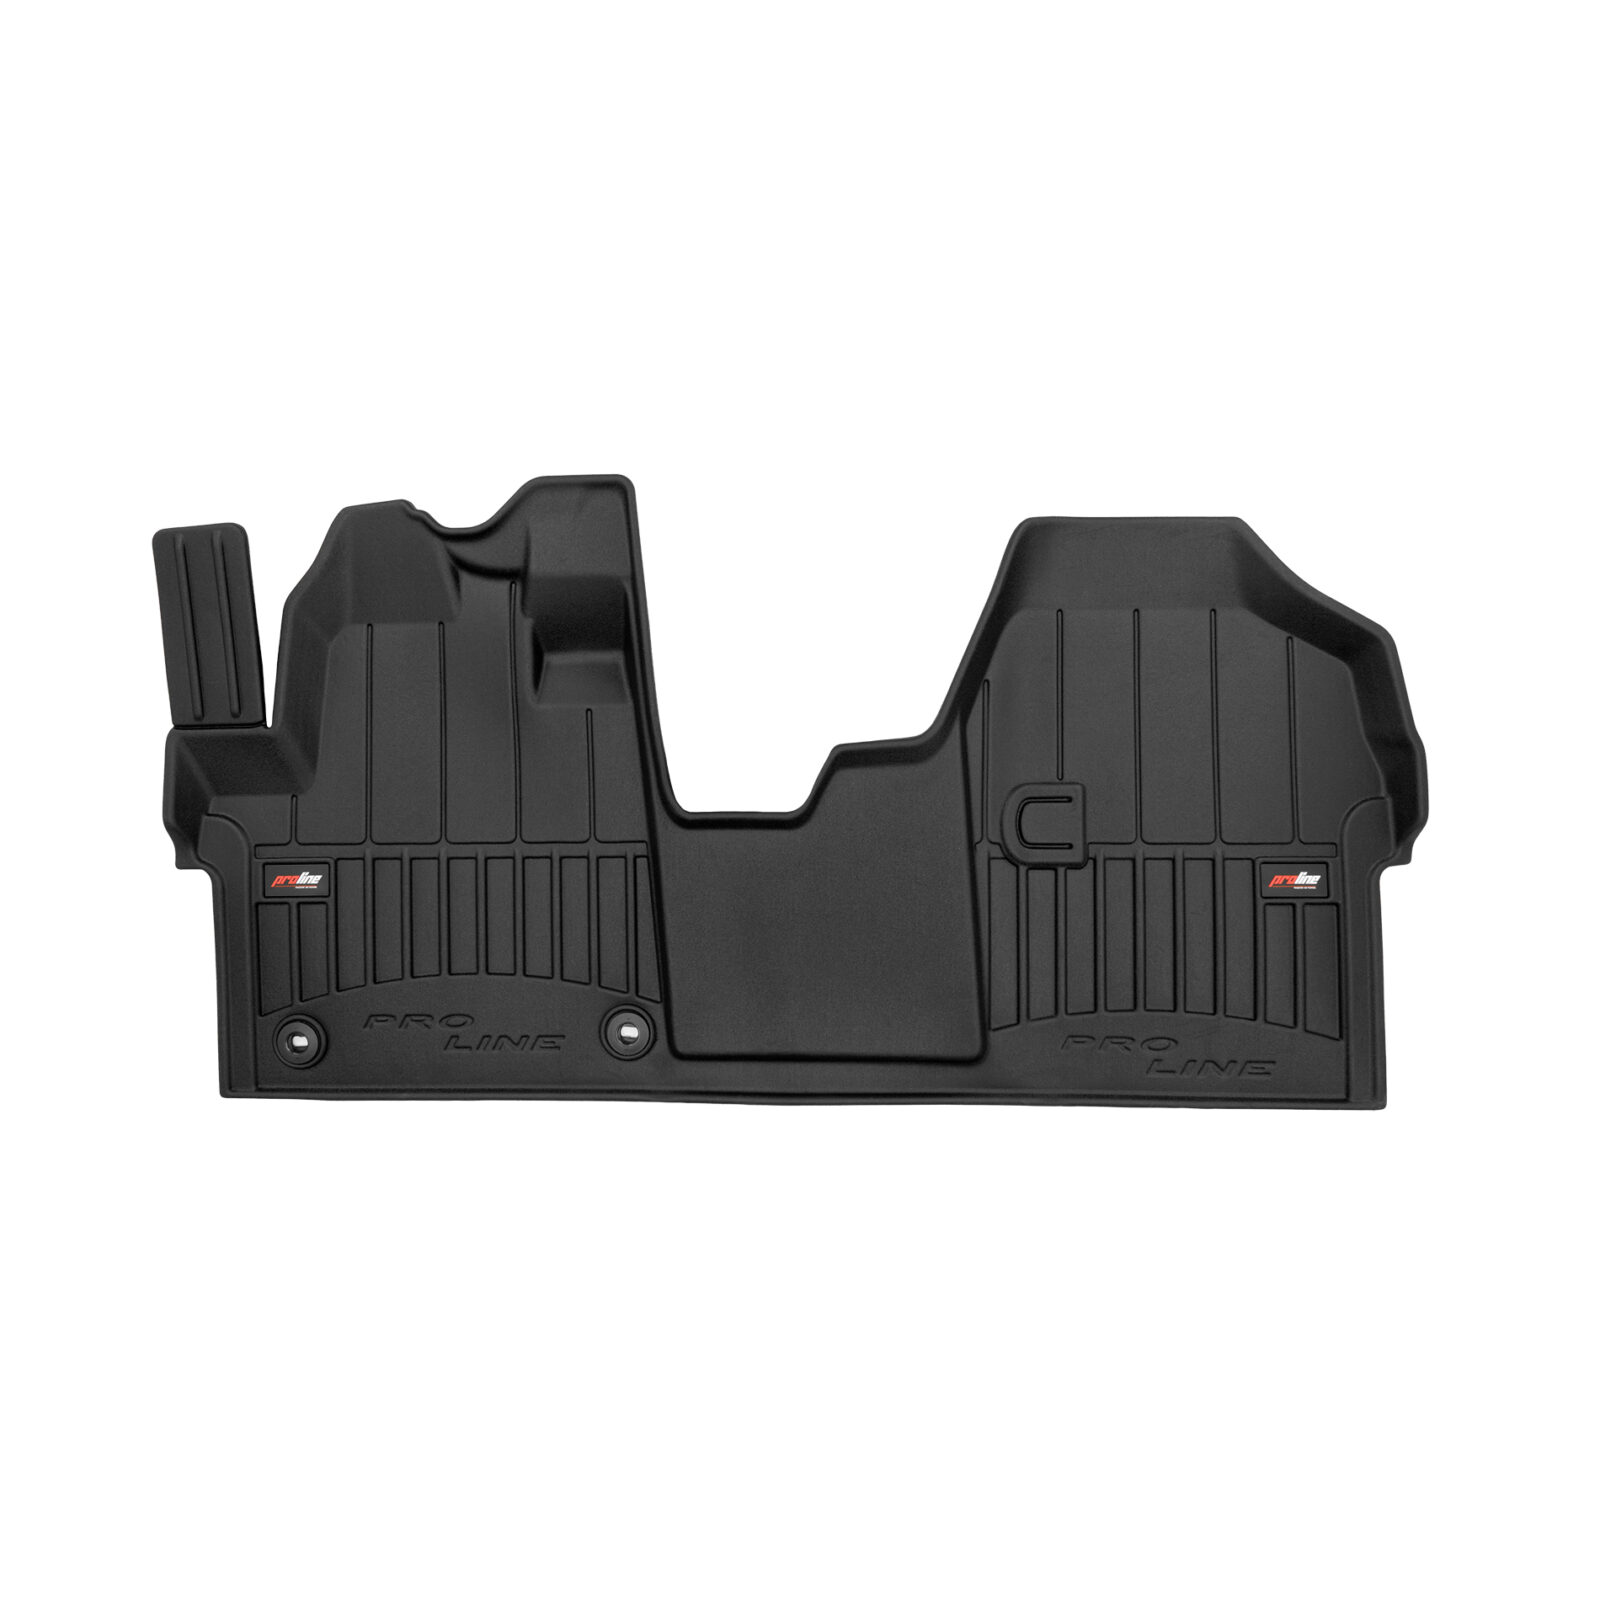 Car mats ProLine tailor-made for Toyota Proace II since 2016